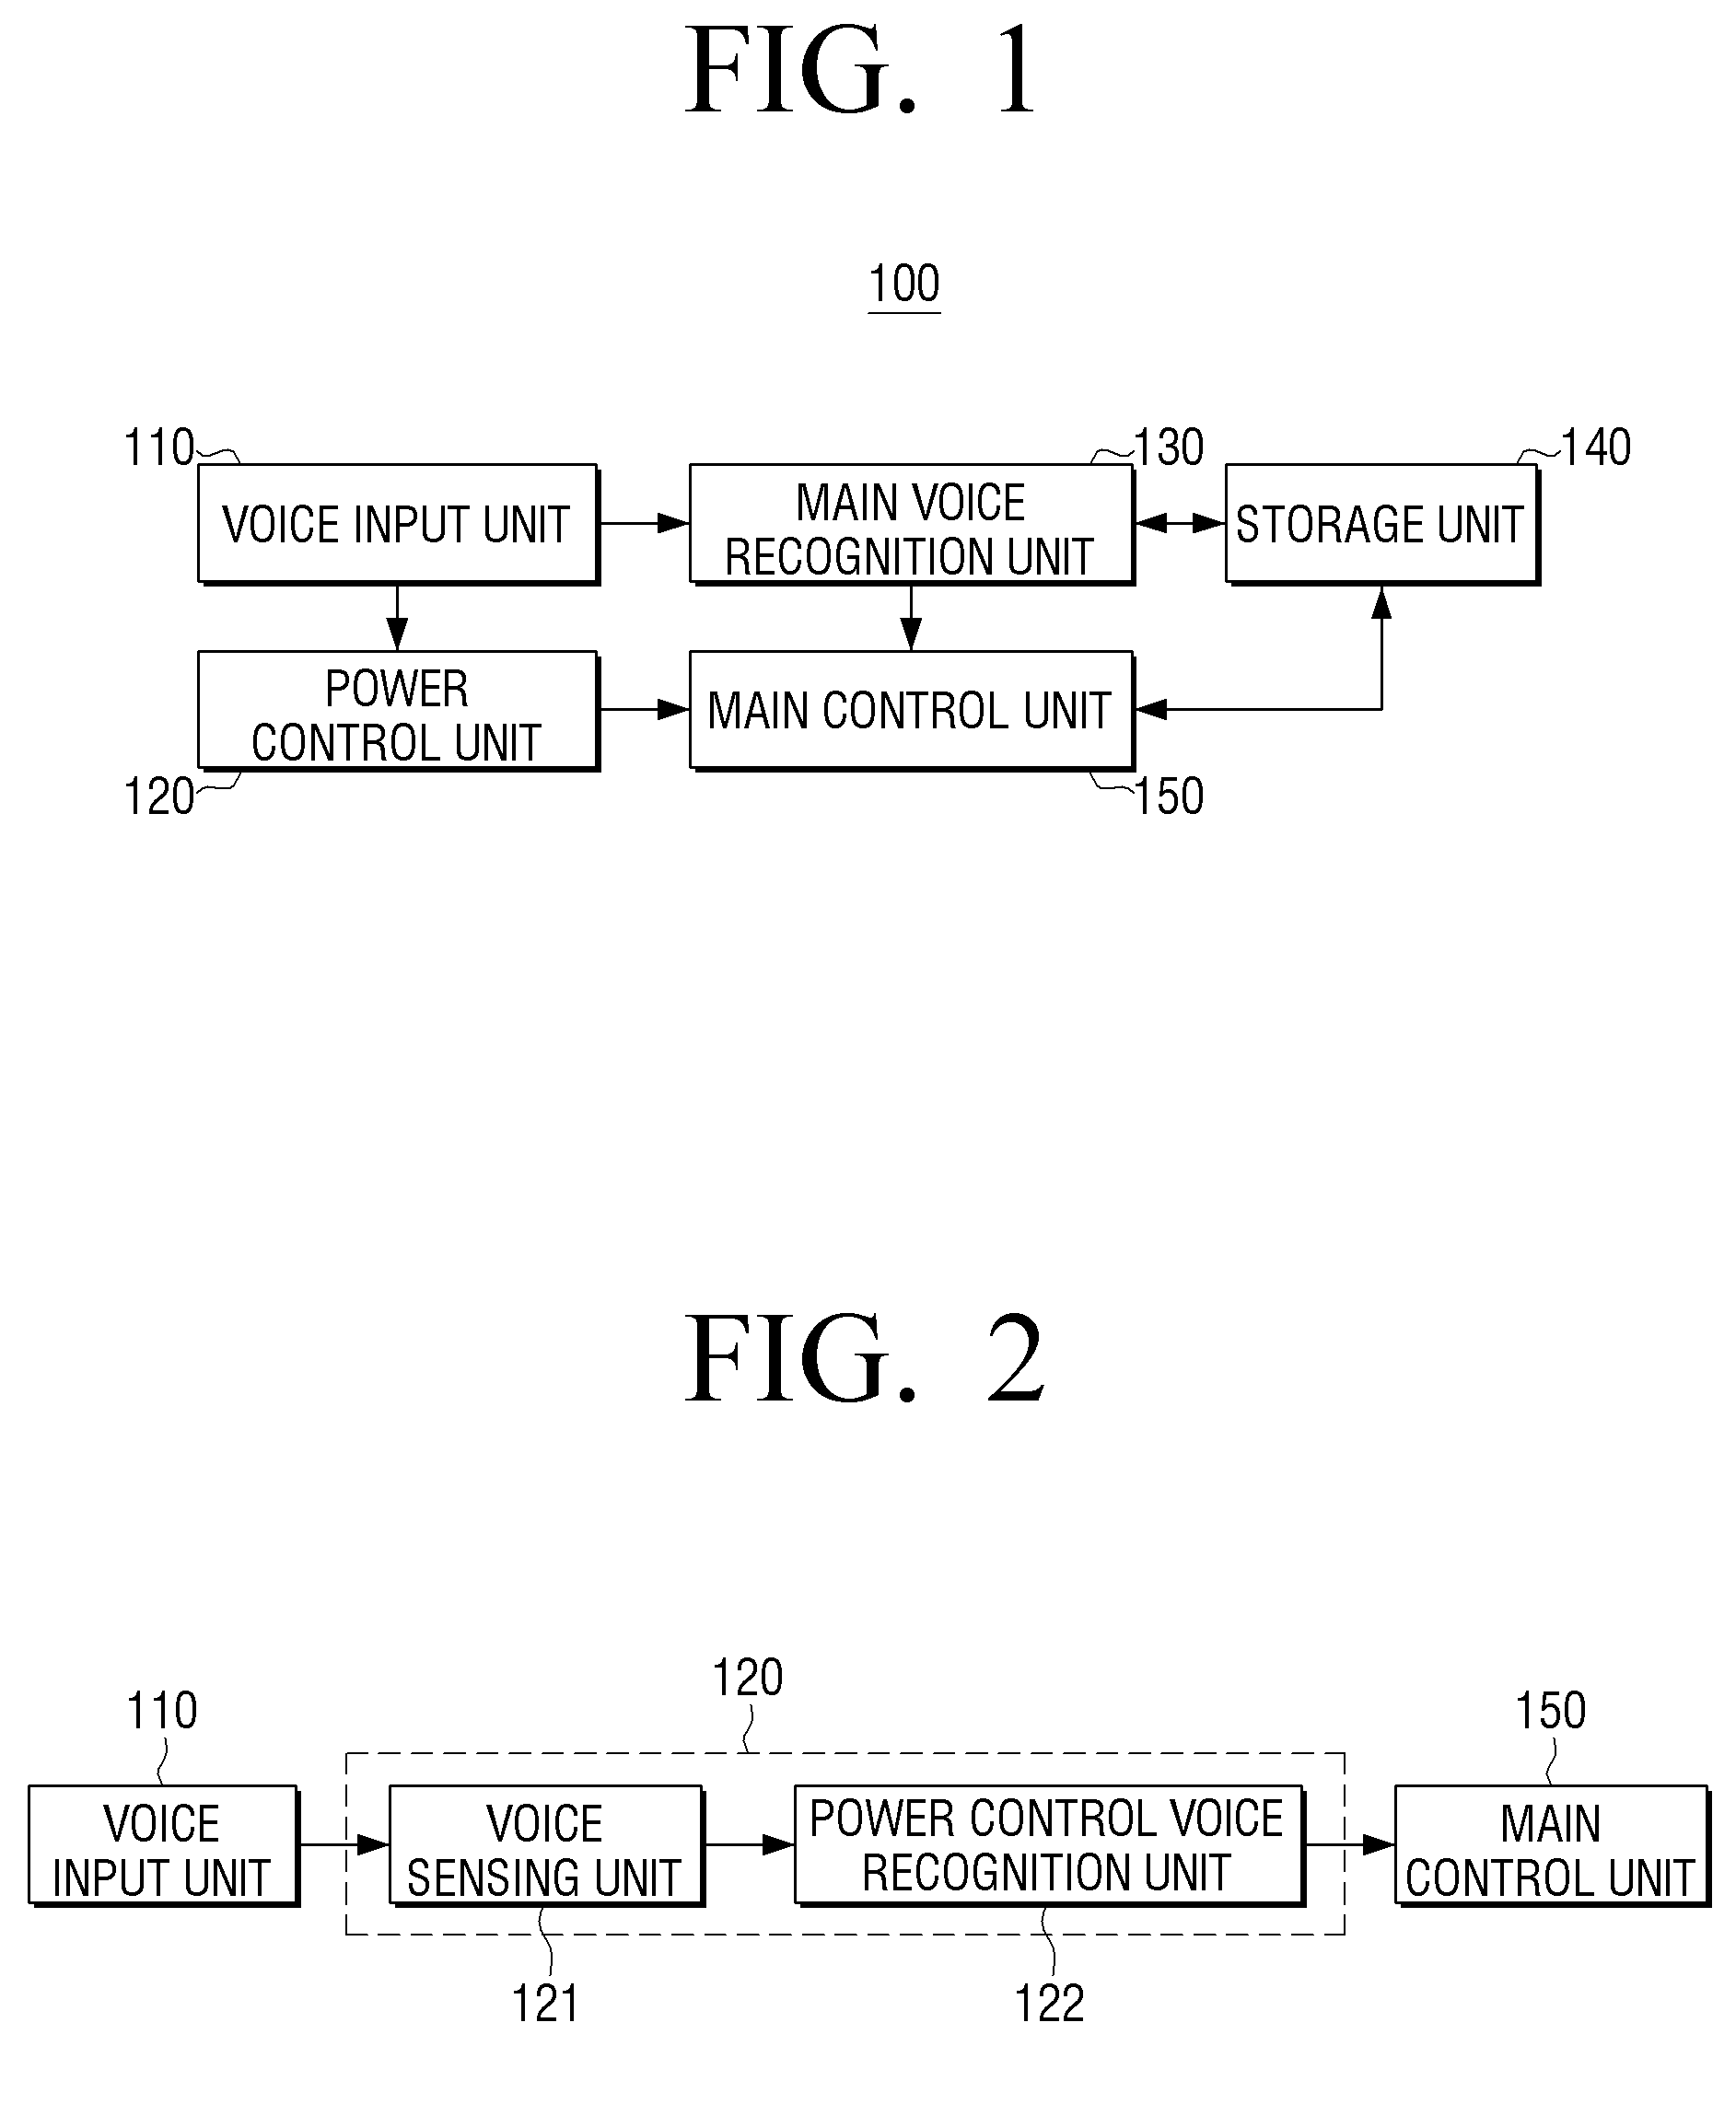 Electronic device and method for controlling power using voice recognition